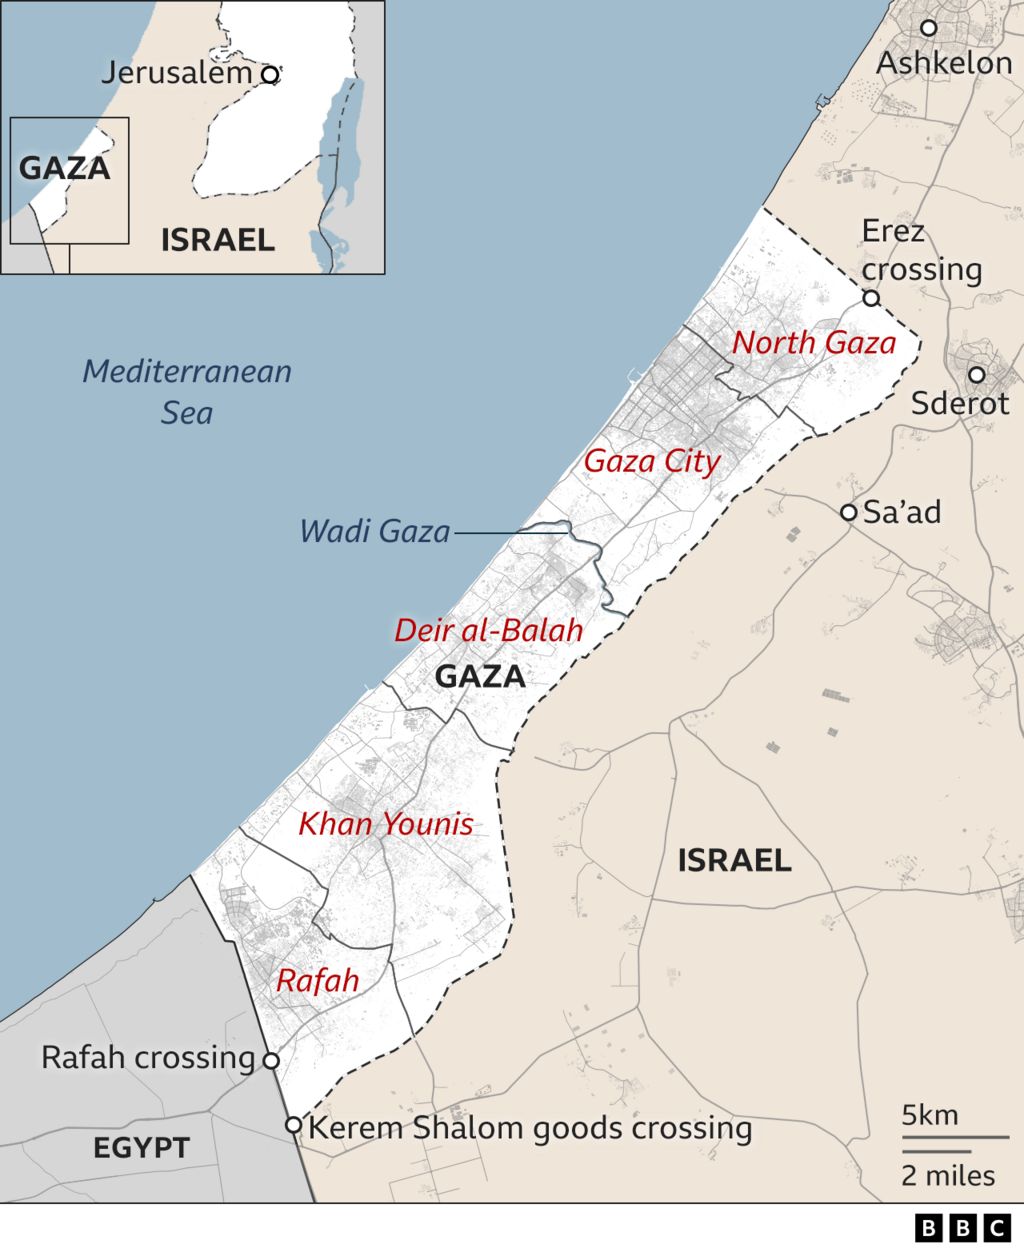 Map of Gaza showing locations of Gaza City, Khan Younis and the evacuation zone in the north, as well as Israel and Egypt